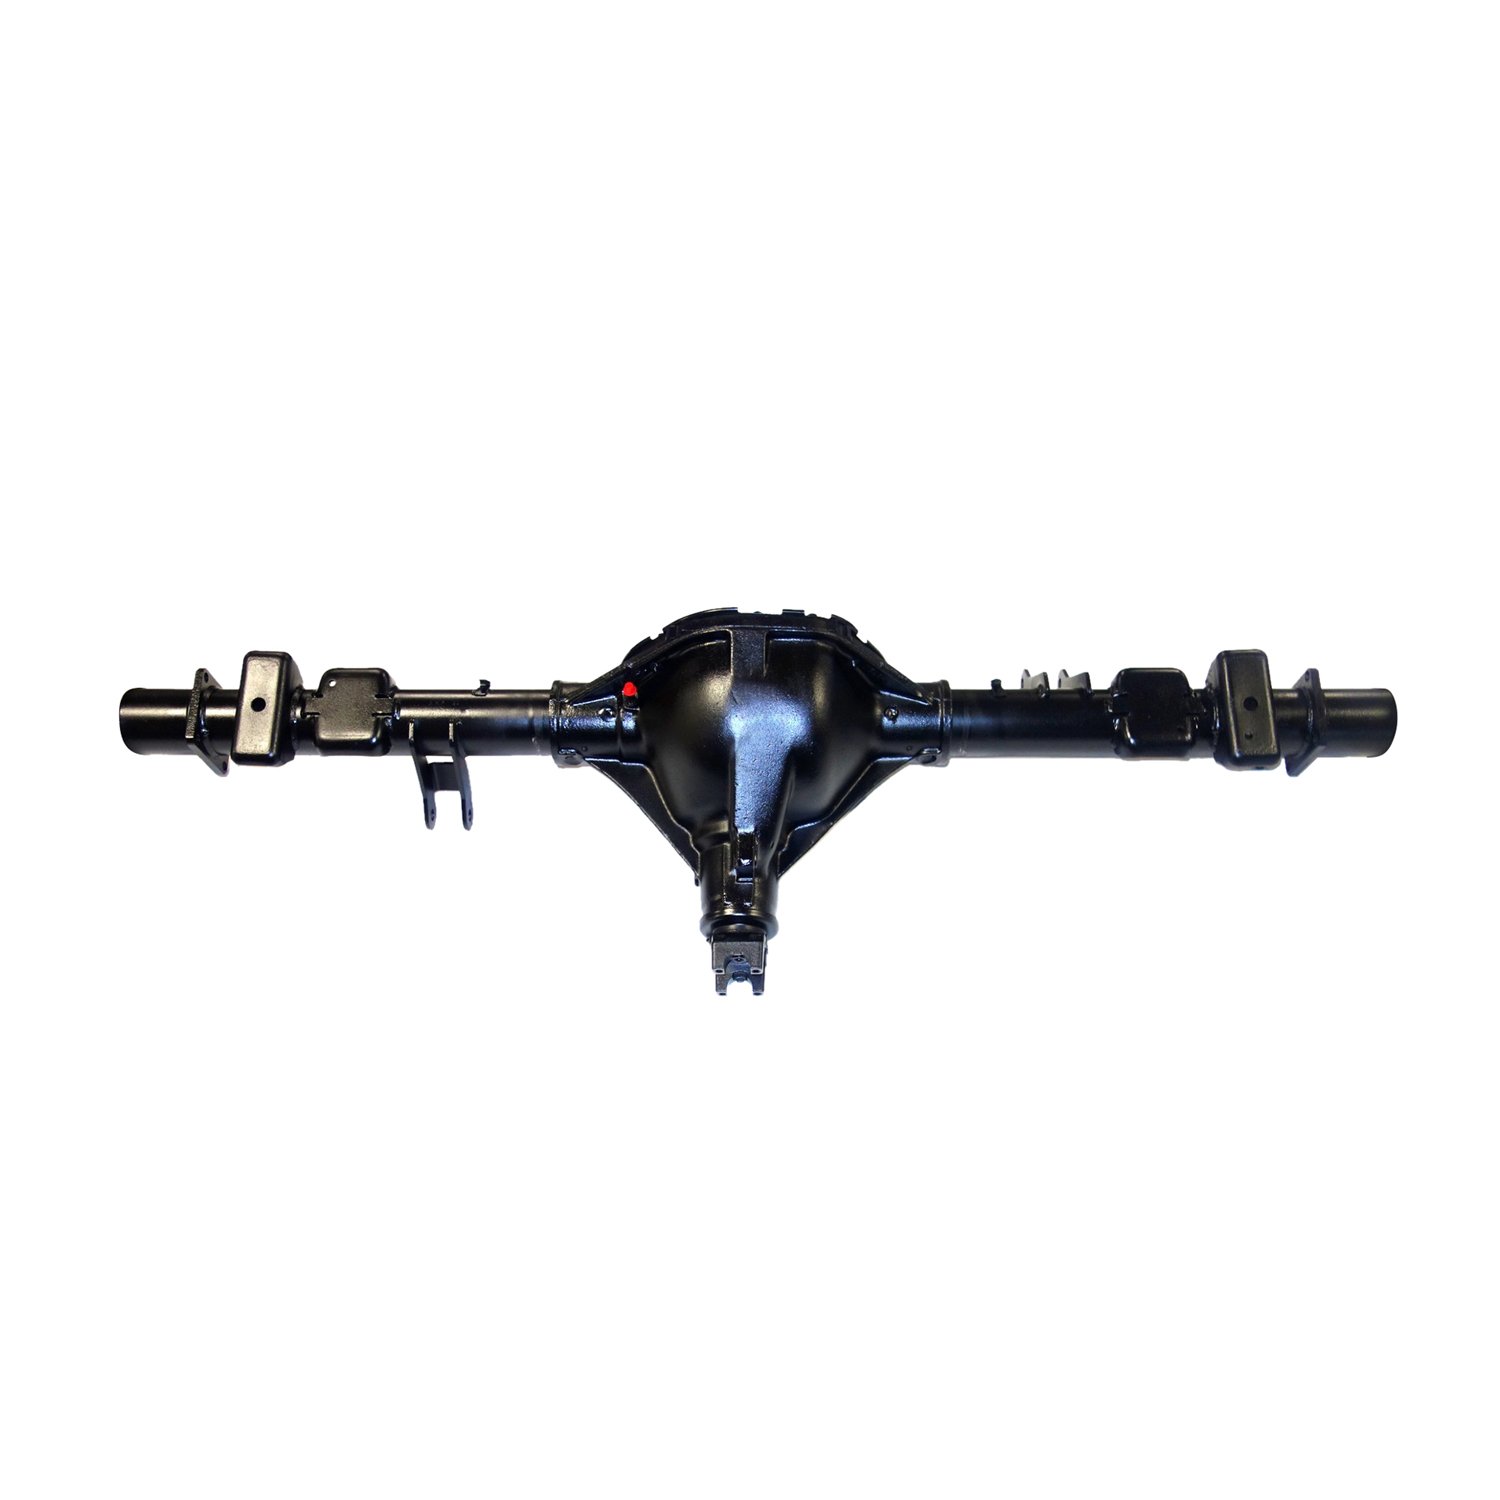 Remanufactured Complete Axle Assembly for GM 9.5" 07-13 GMC 1500 3.42 Ratio, 2wd